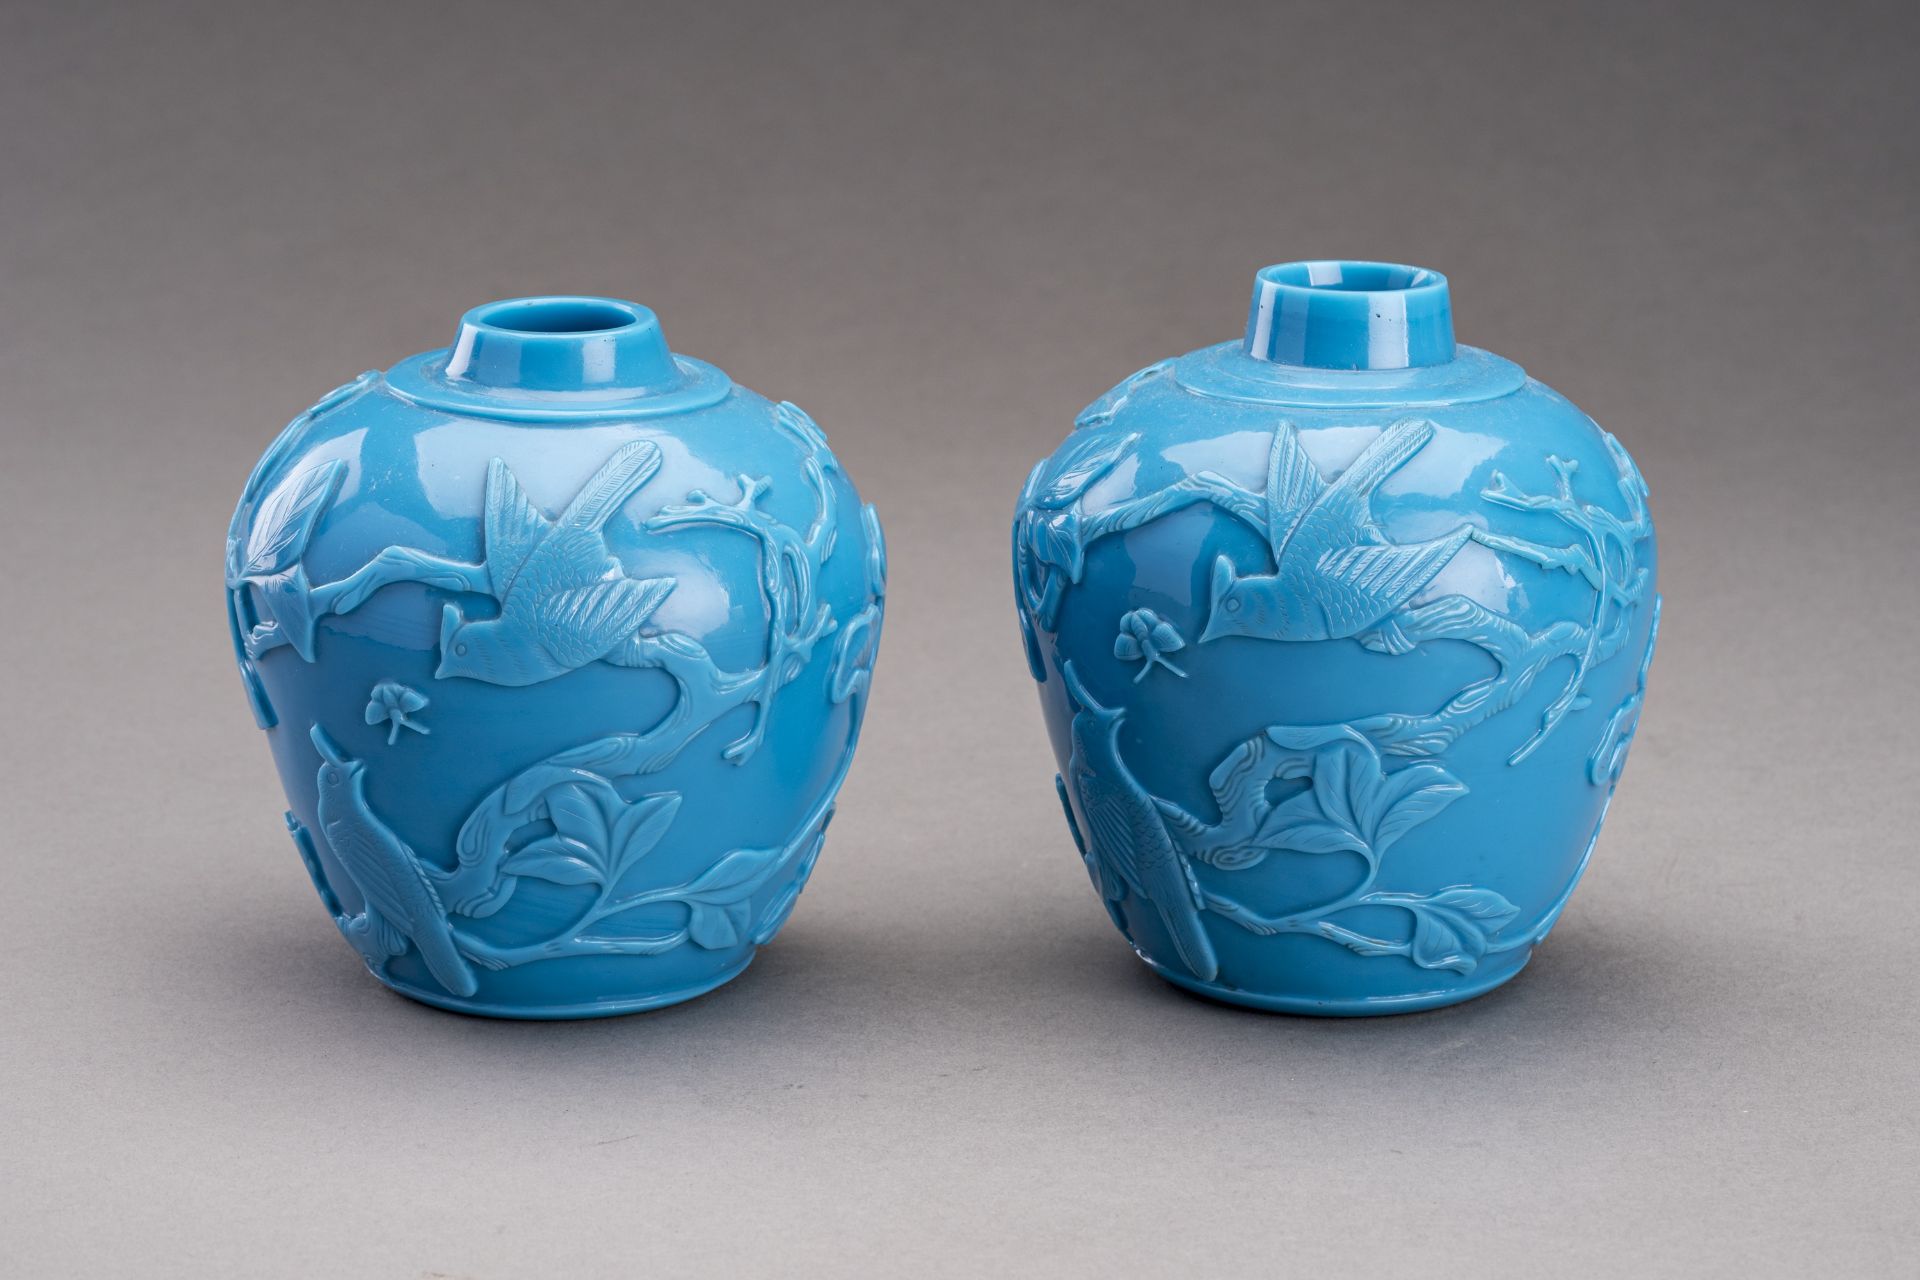 A PAIR OF PEKING GLASS VASES - Image 2 of 6